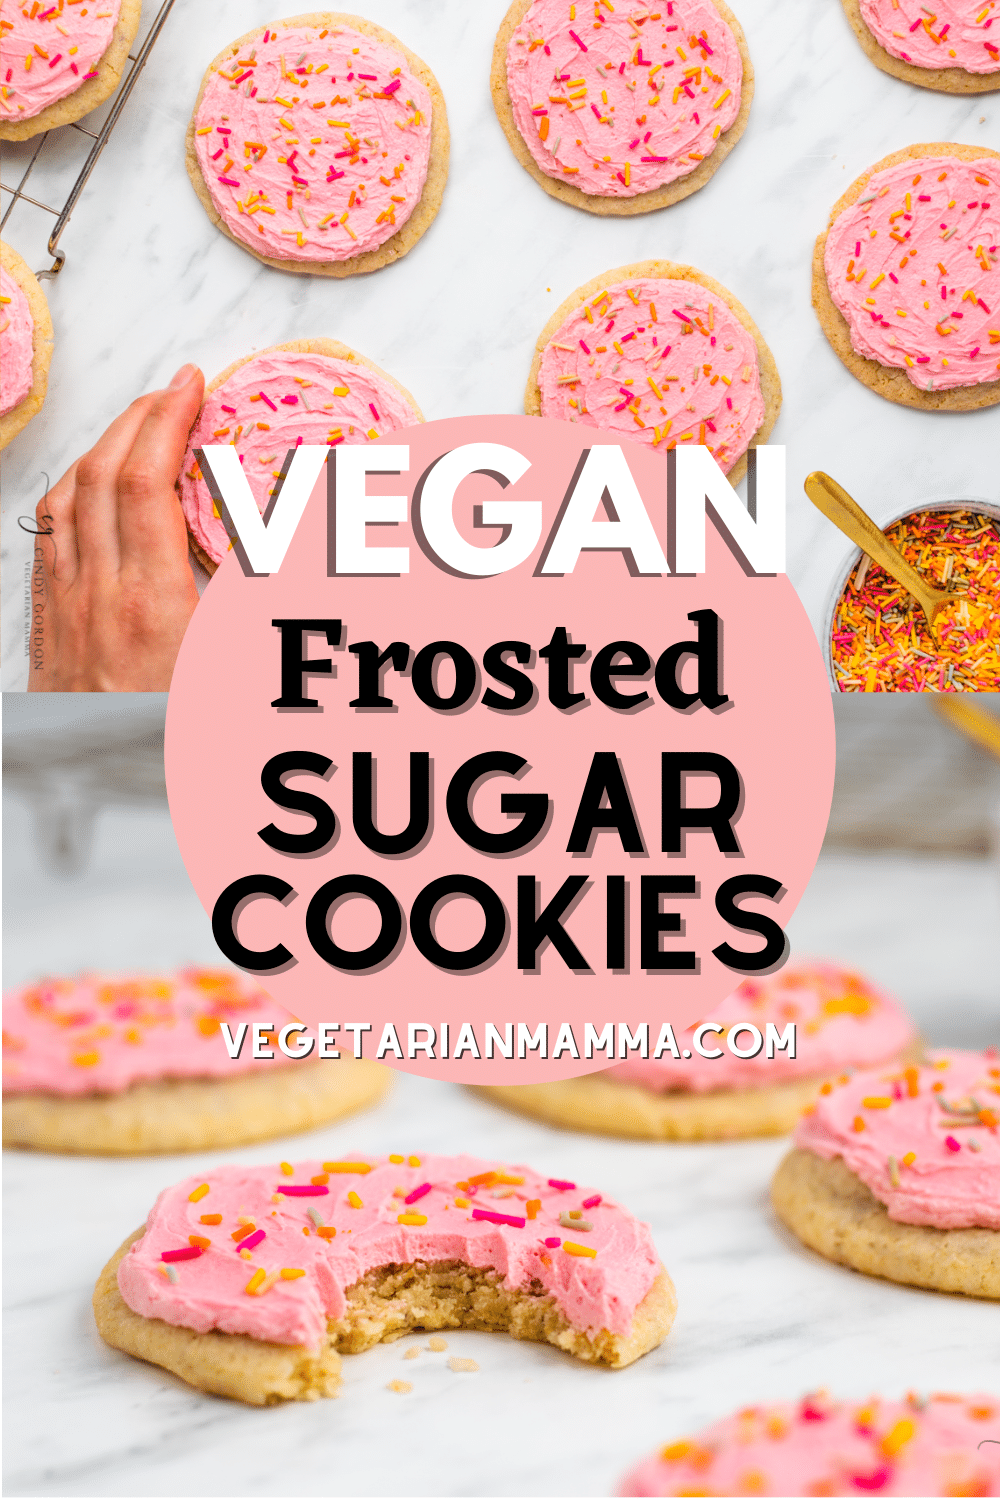 These Vegan Frosted Sugar Cookies are just like the bakery treats you love with all plant-based ingredients! Whip them up in just 30 minutes and top with a homemade pink vegan buttercream frosting and plenty of sprinkles.